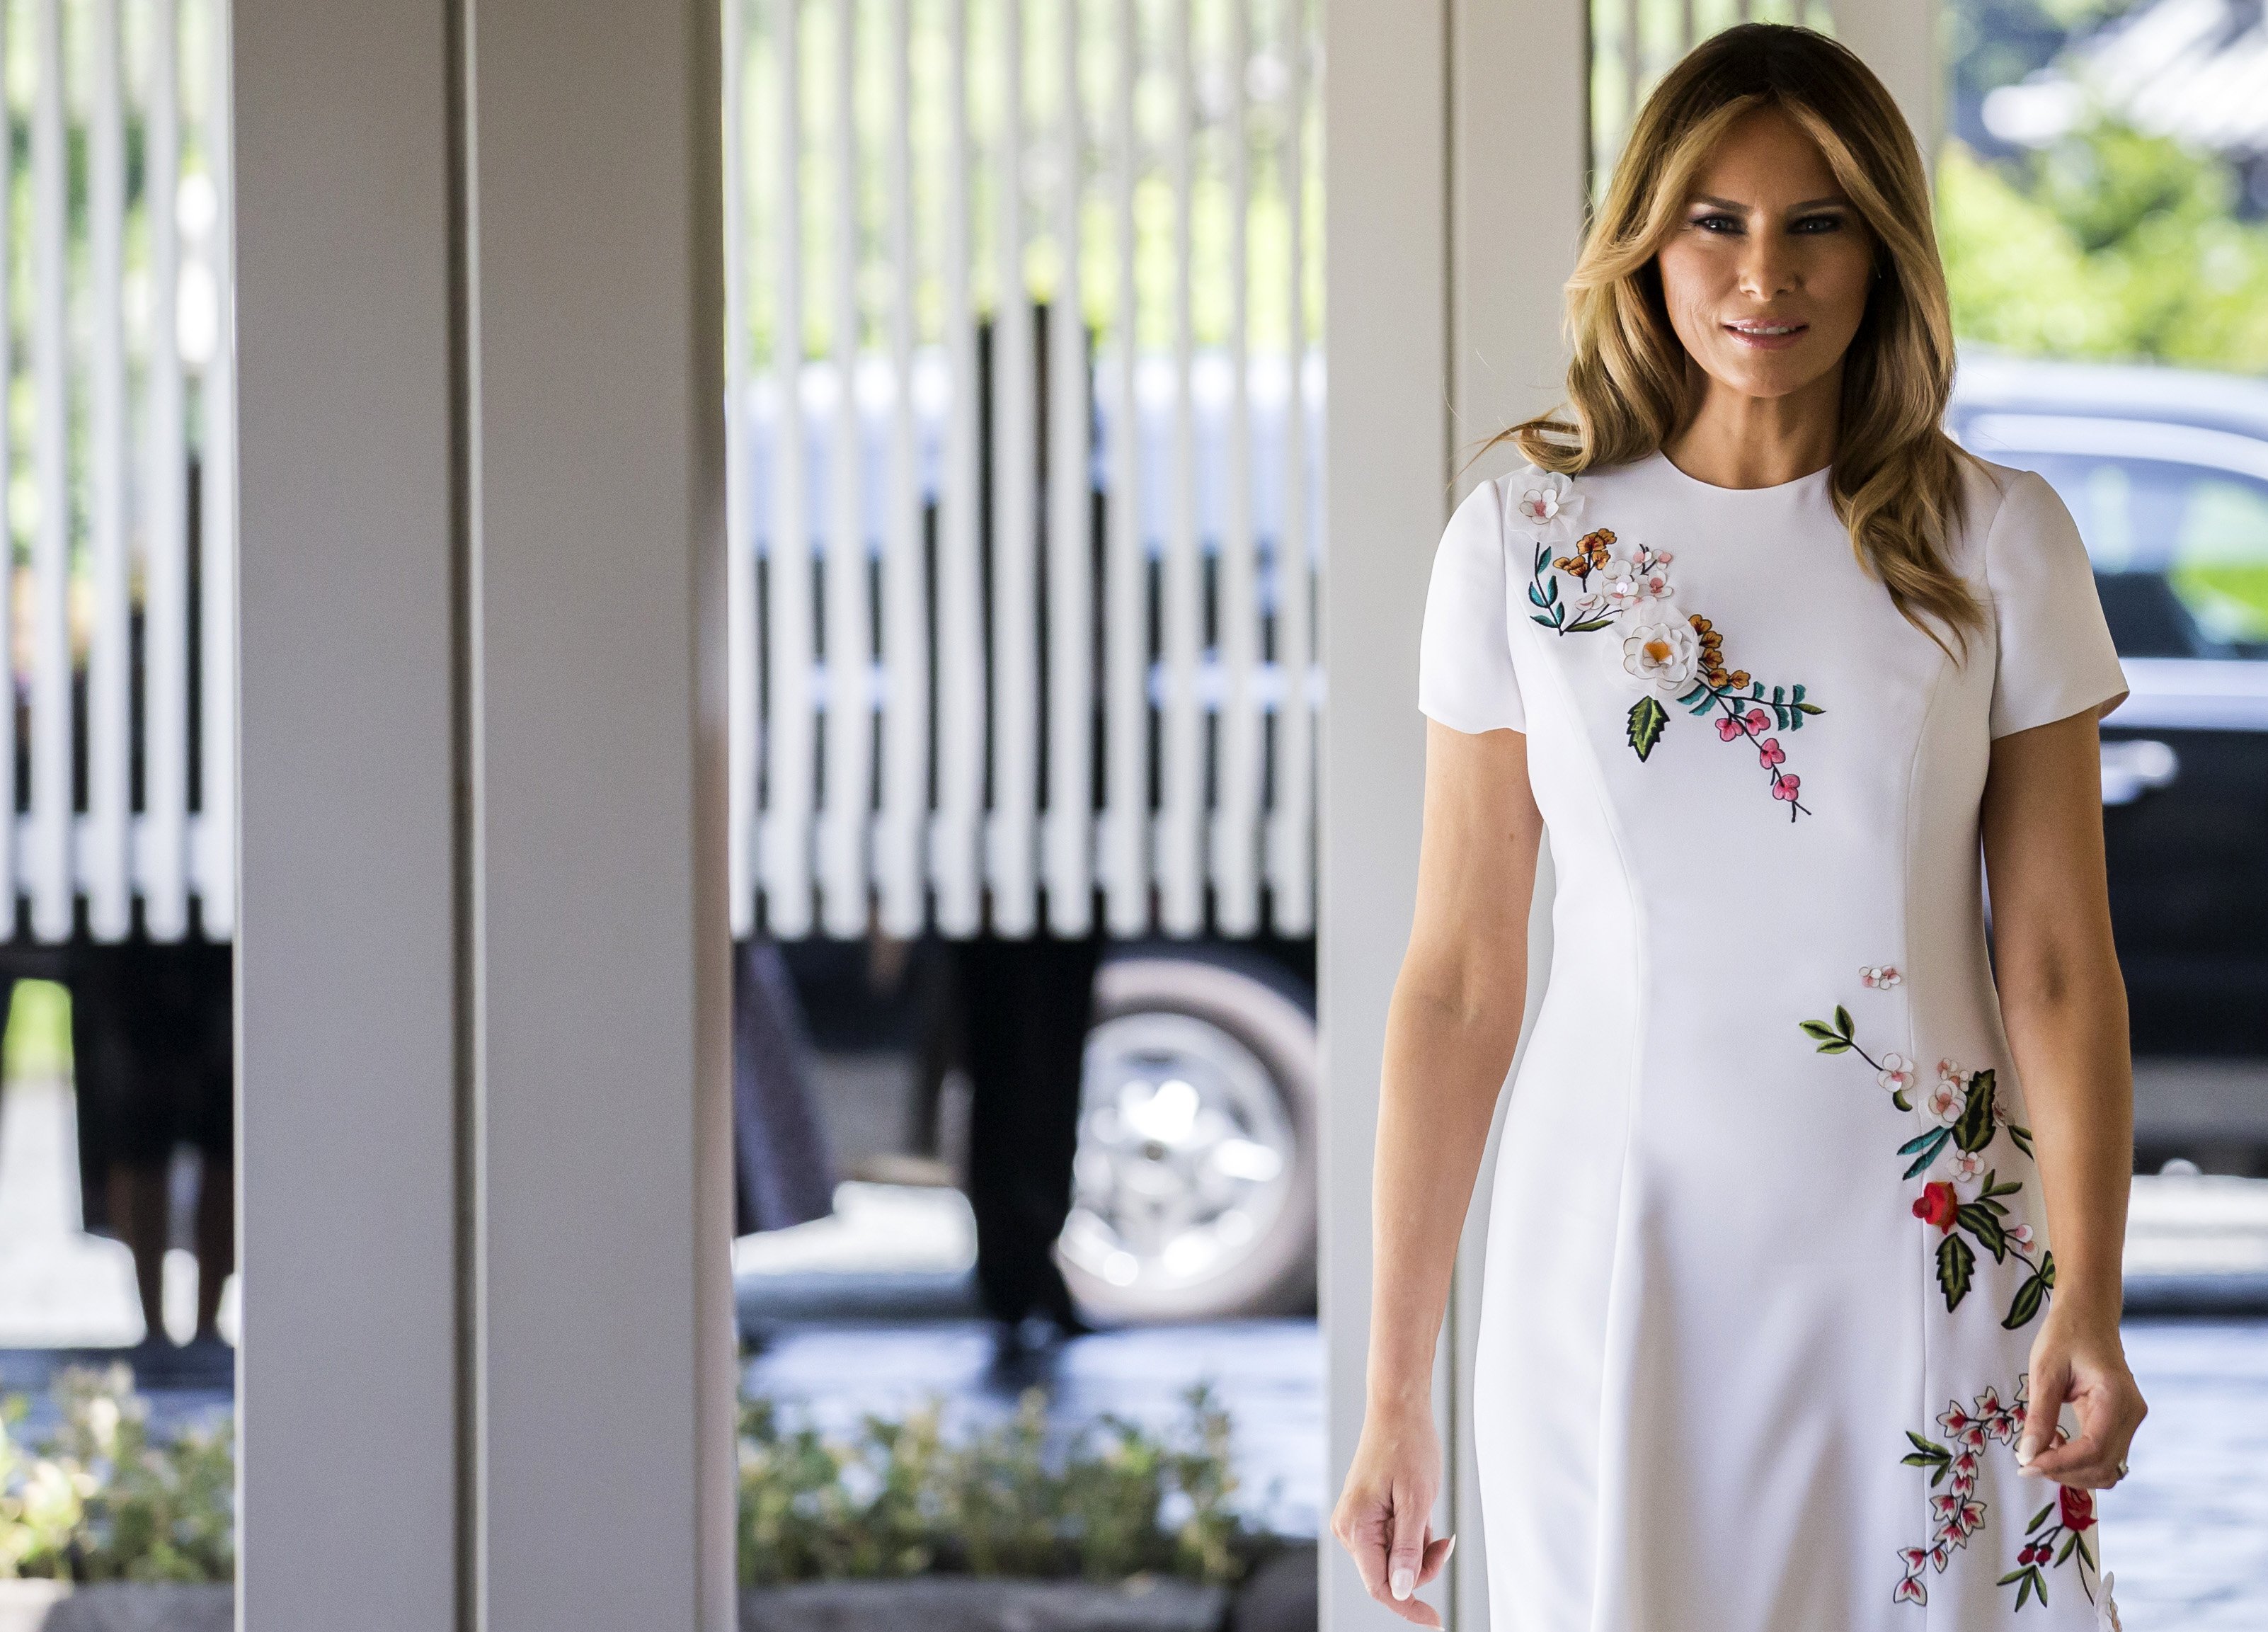 First Lady Melania Trump in Tokyo | Photo: Getty Images